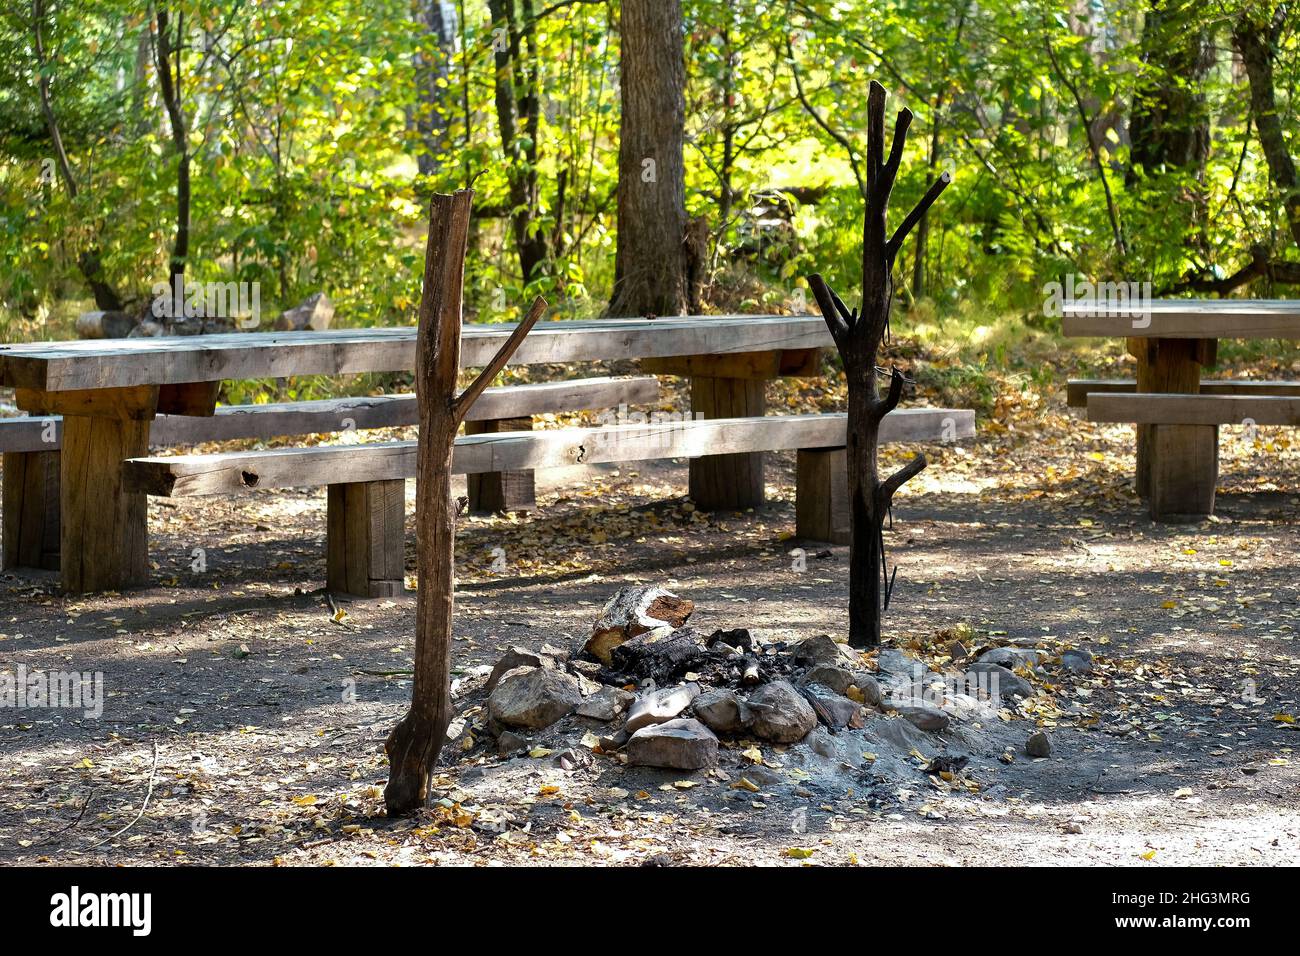 A place for cooking in the forest. Bonfire with sticks. No people. Summer day. Stock Photo